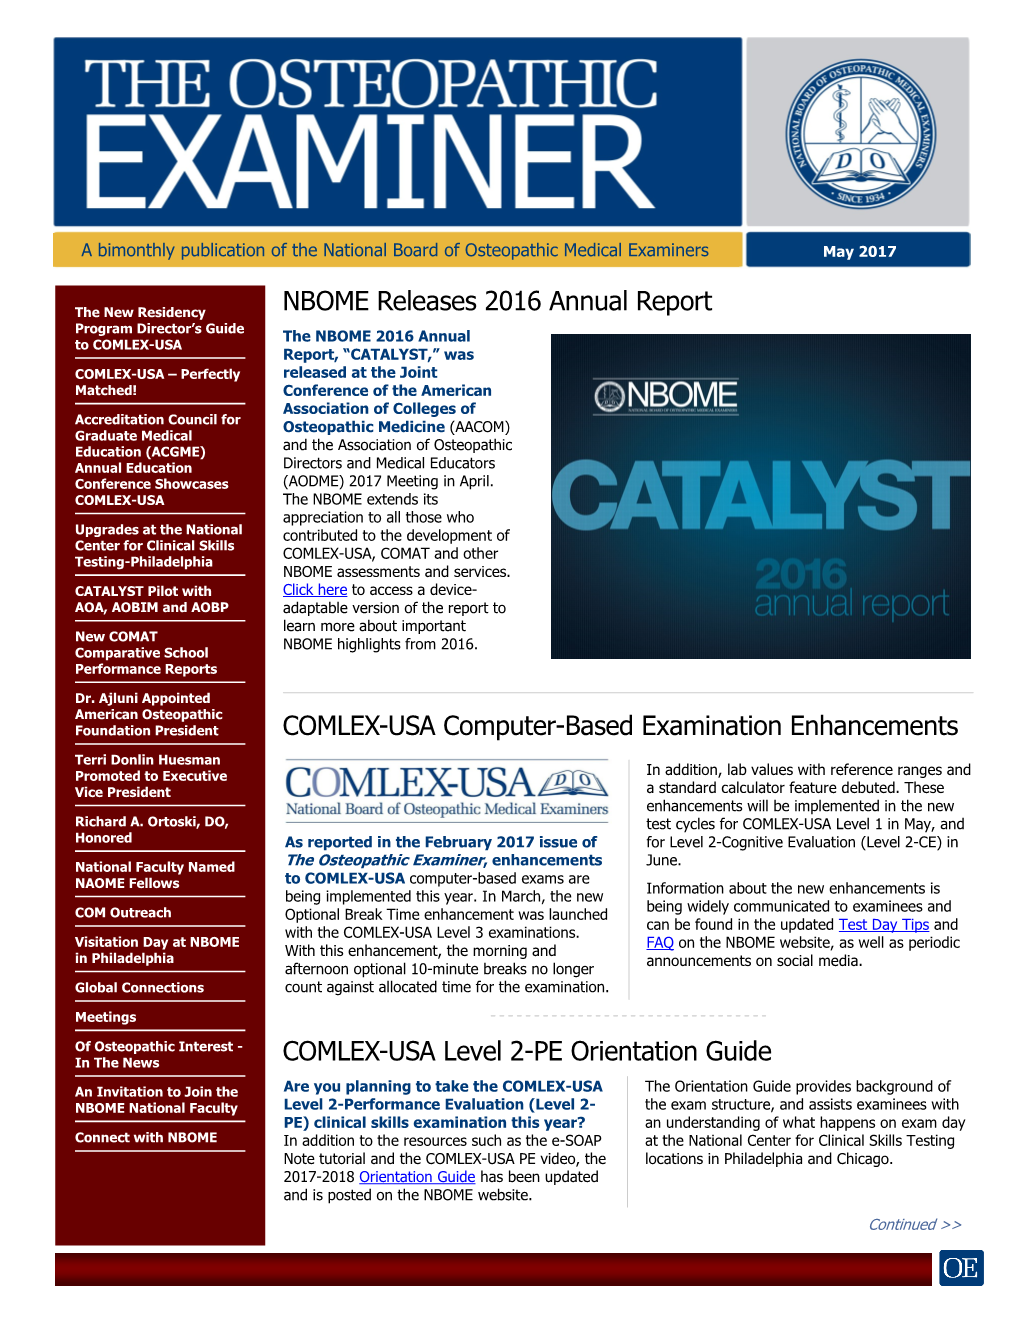 The Osteopathic Examiner, Enhancements June